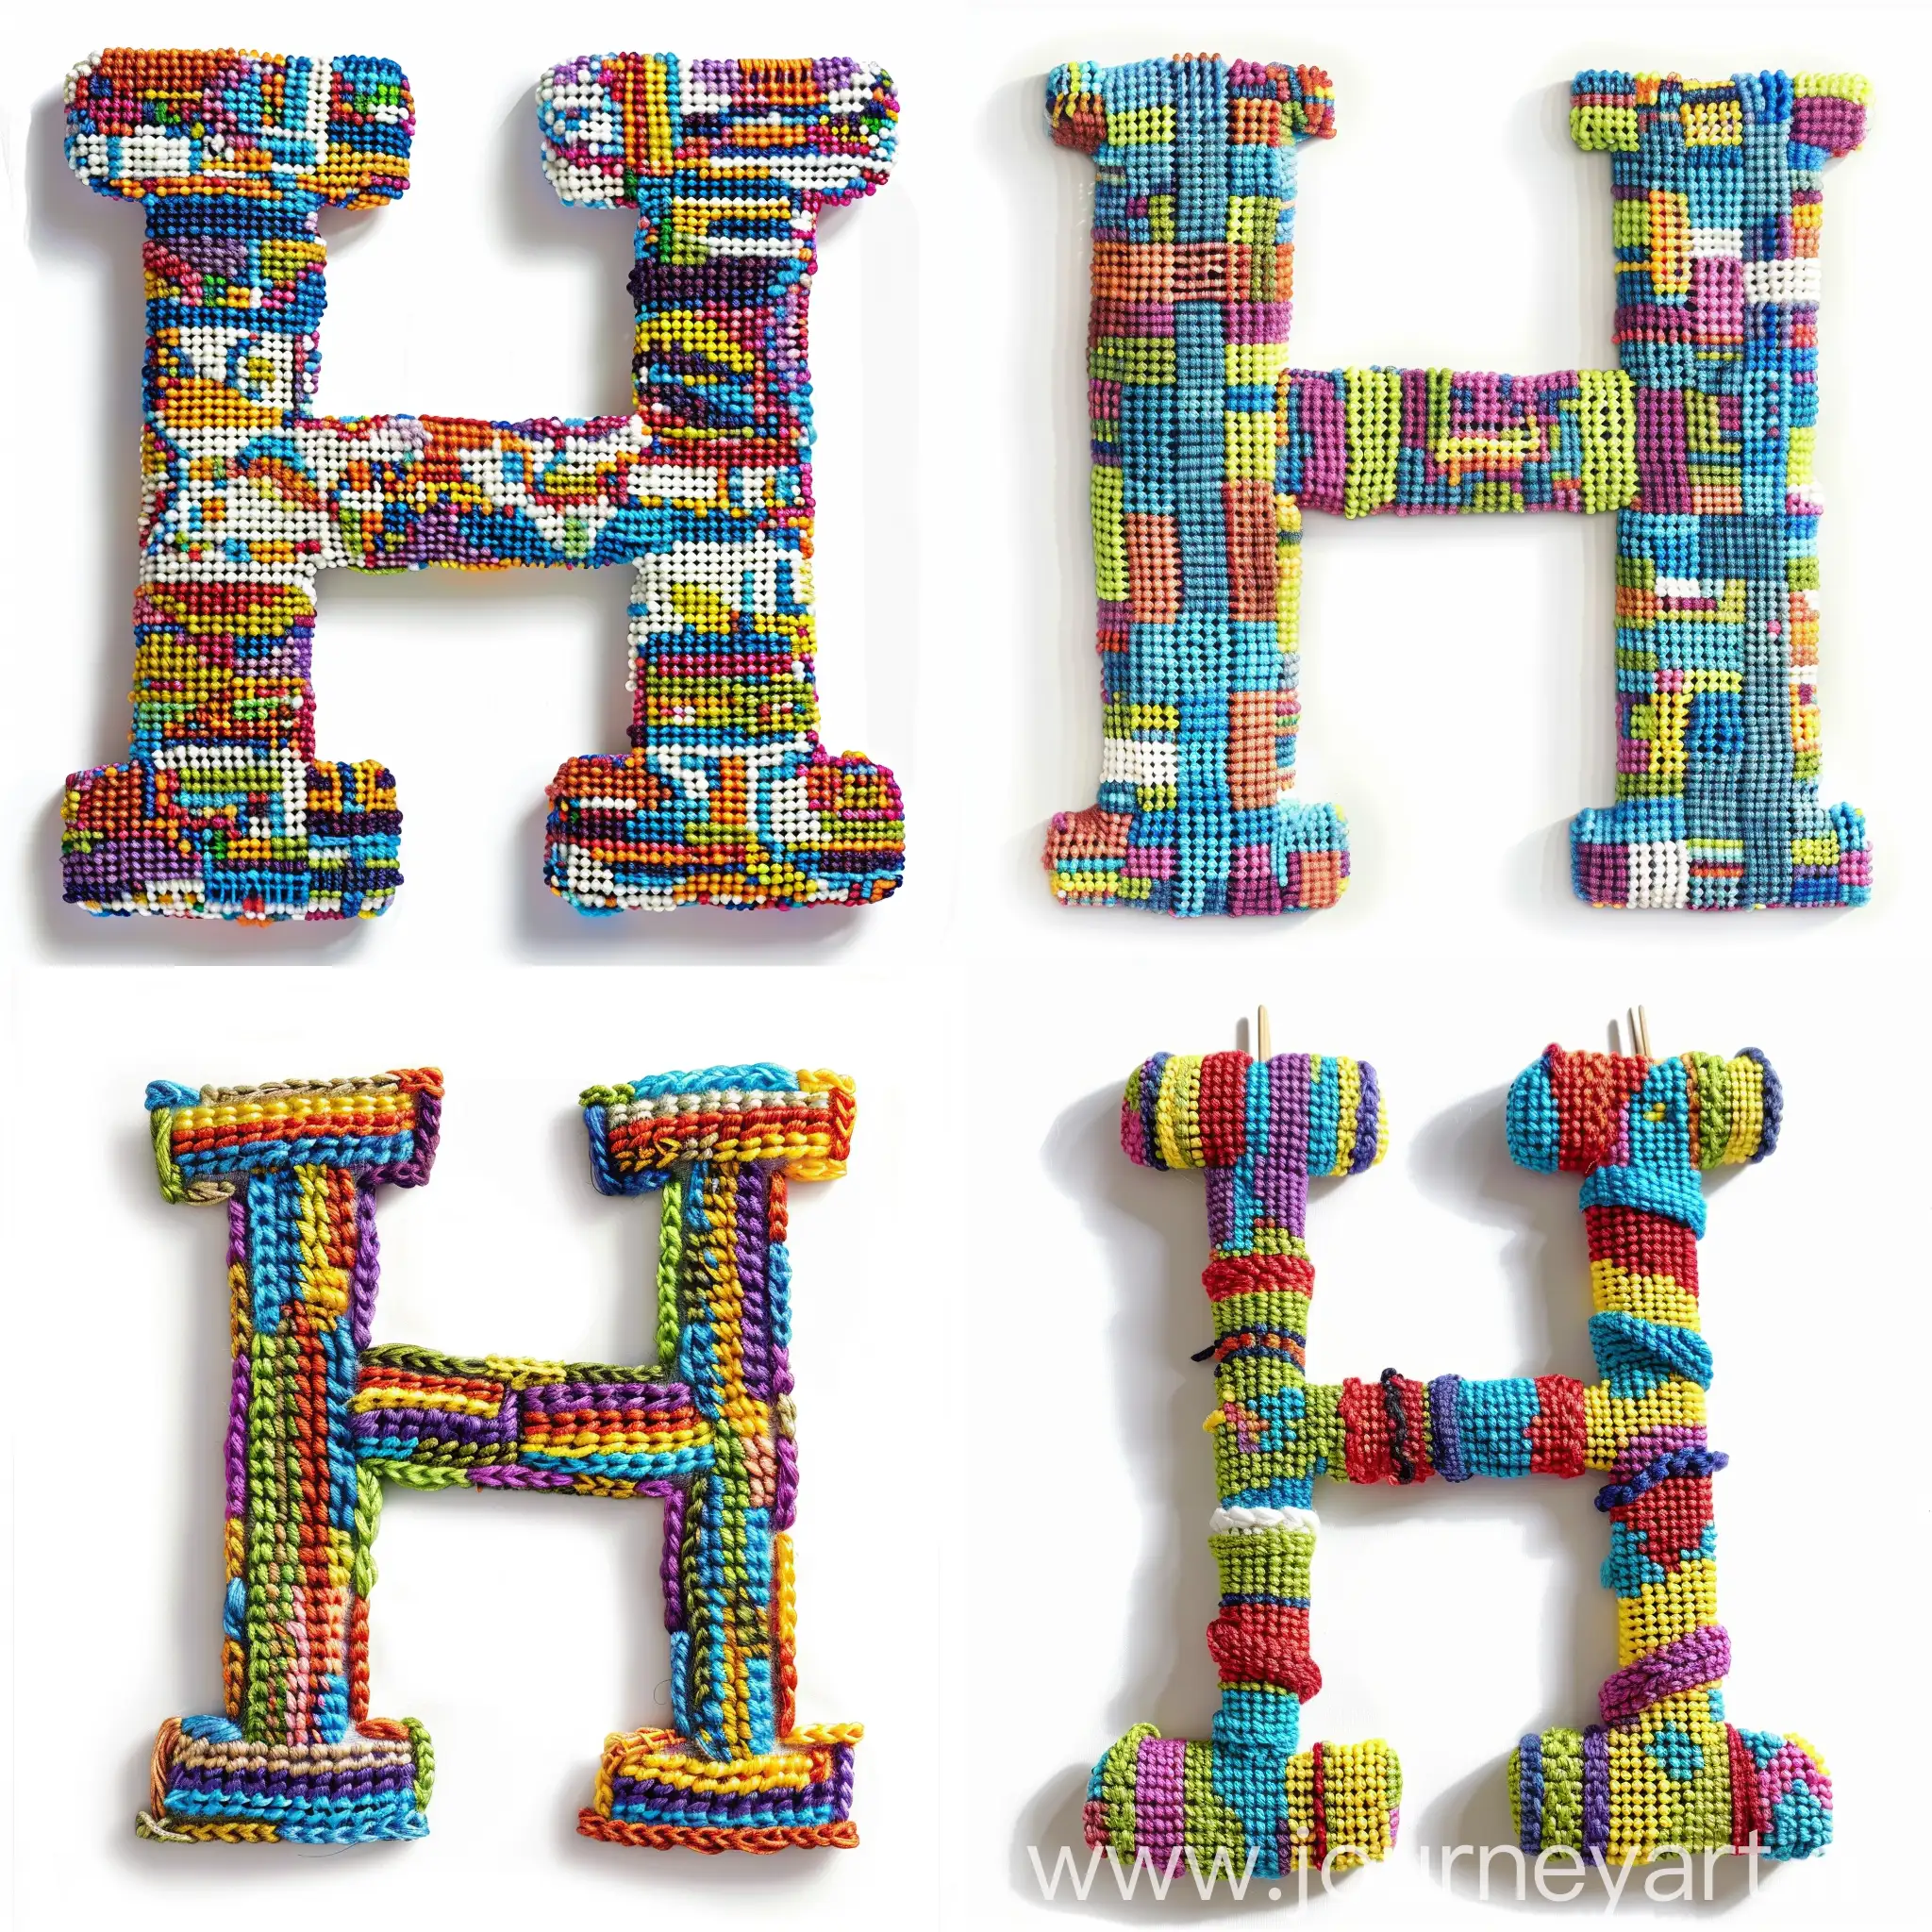 the text letter "H" made of colorful knitted ebroidery, completely white background, no shadows